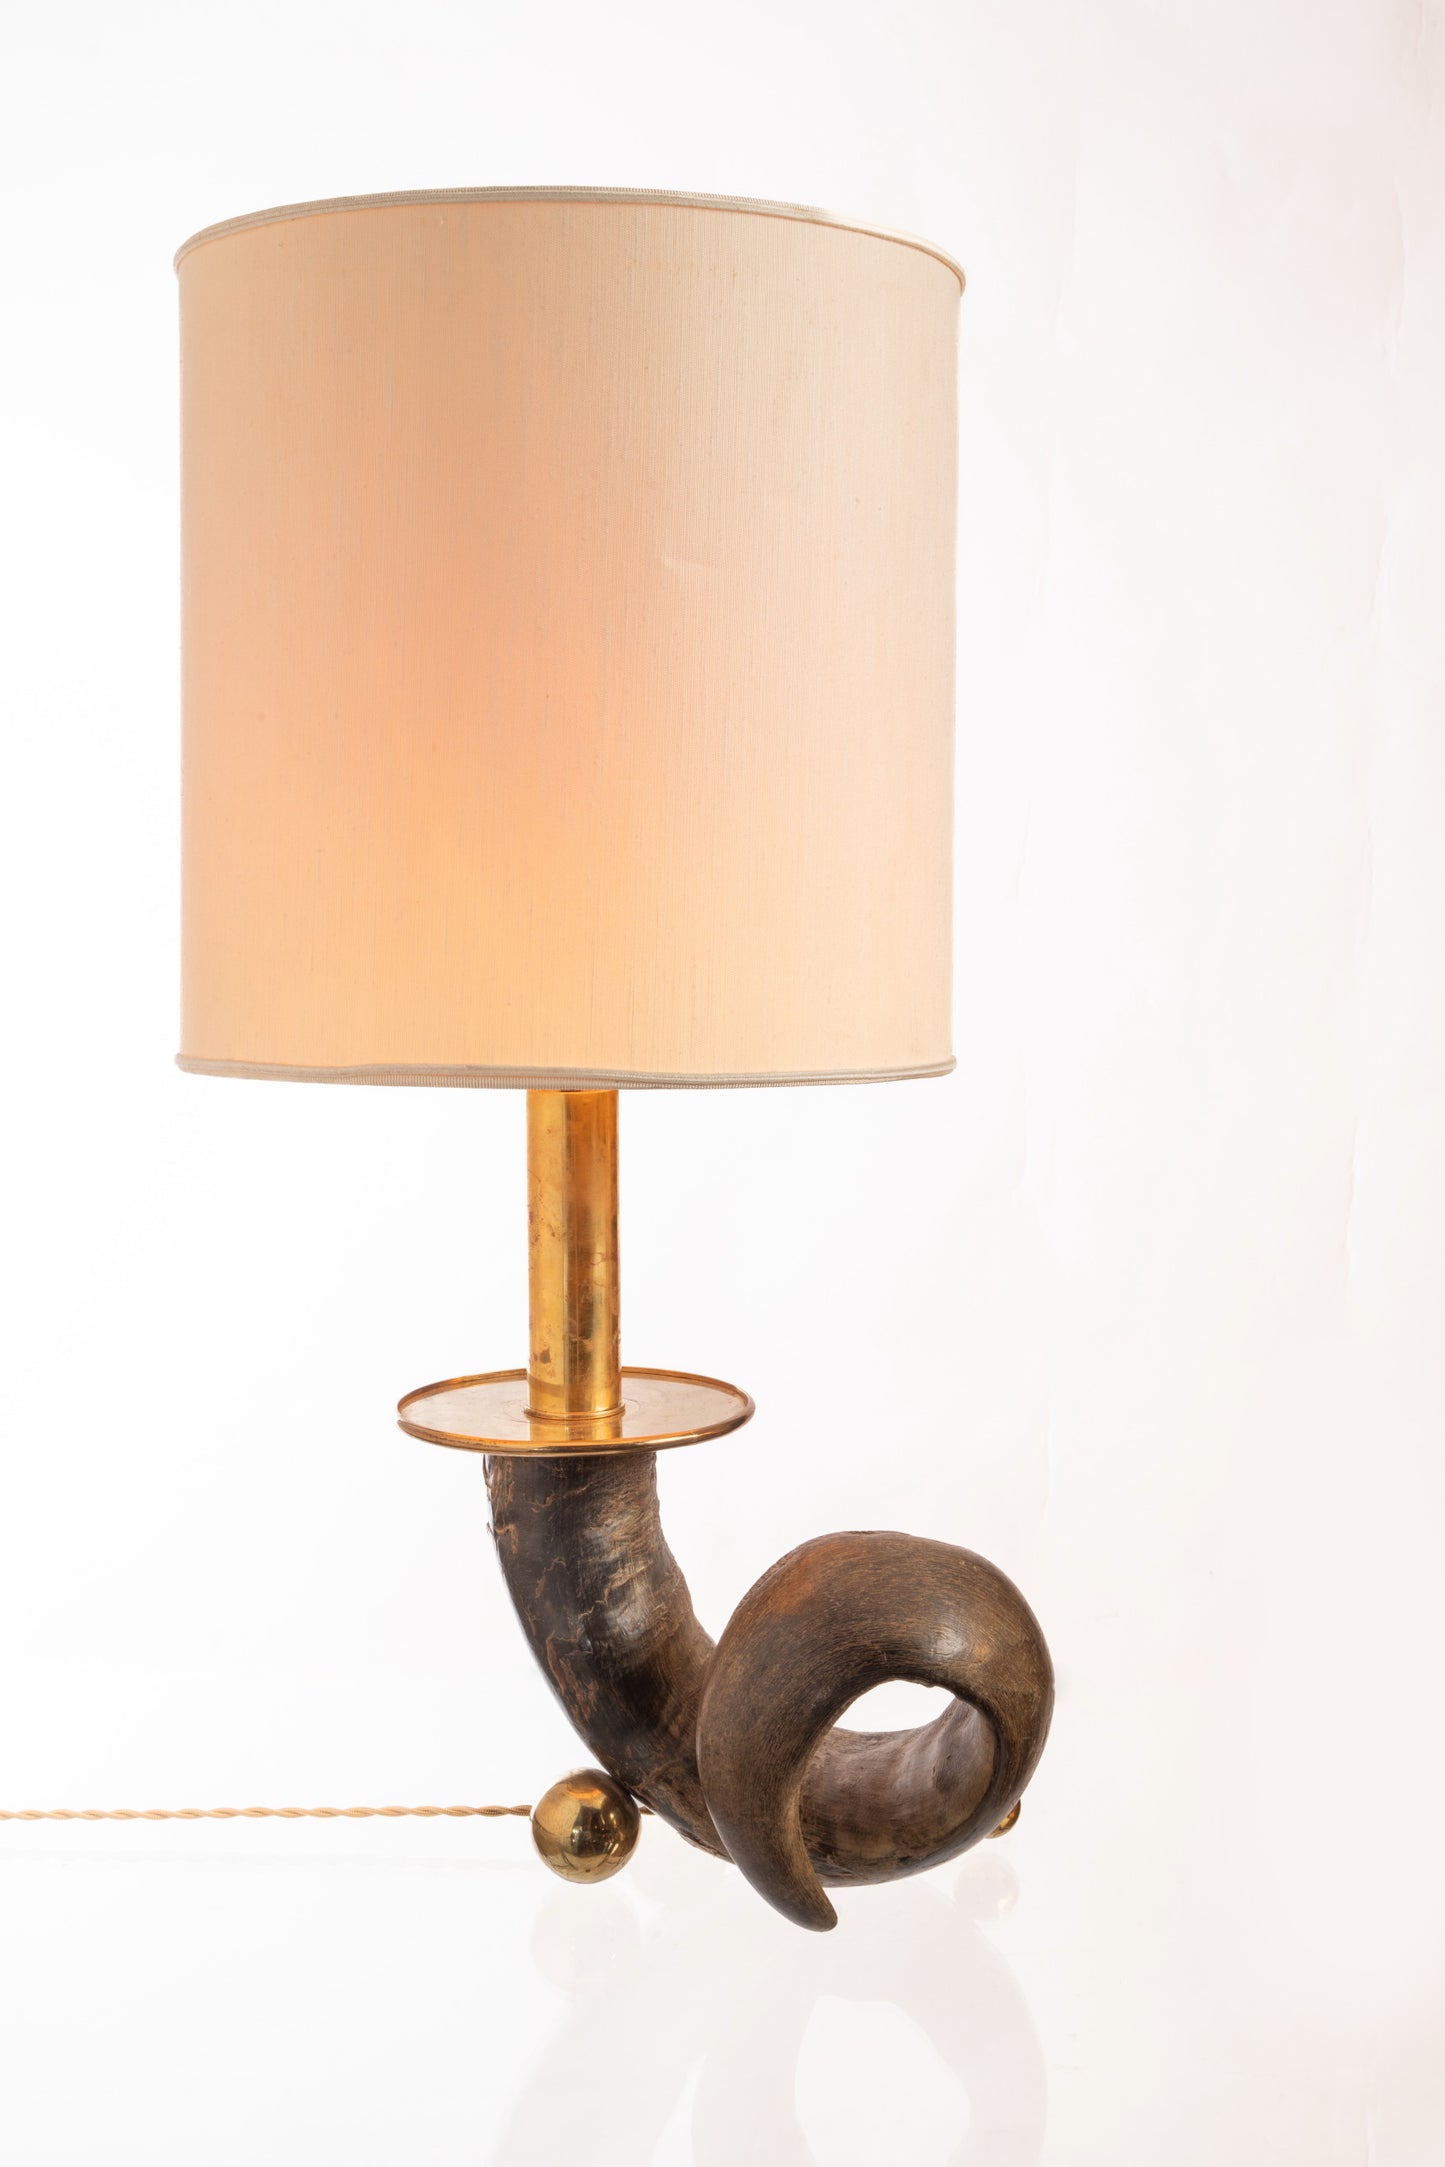 Gabriella Crespi horn lamp base from the 70s